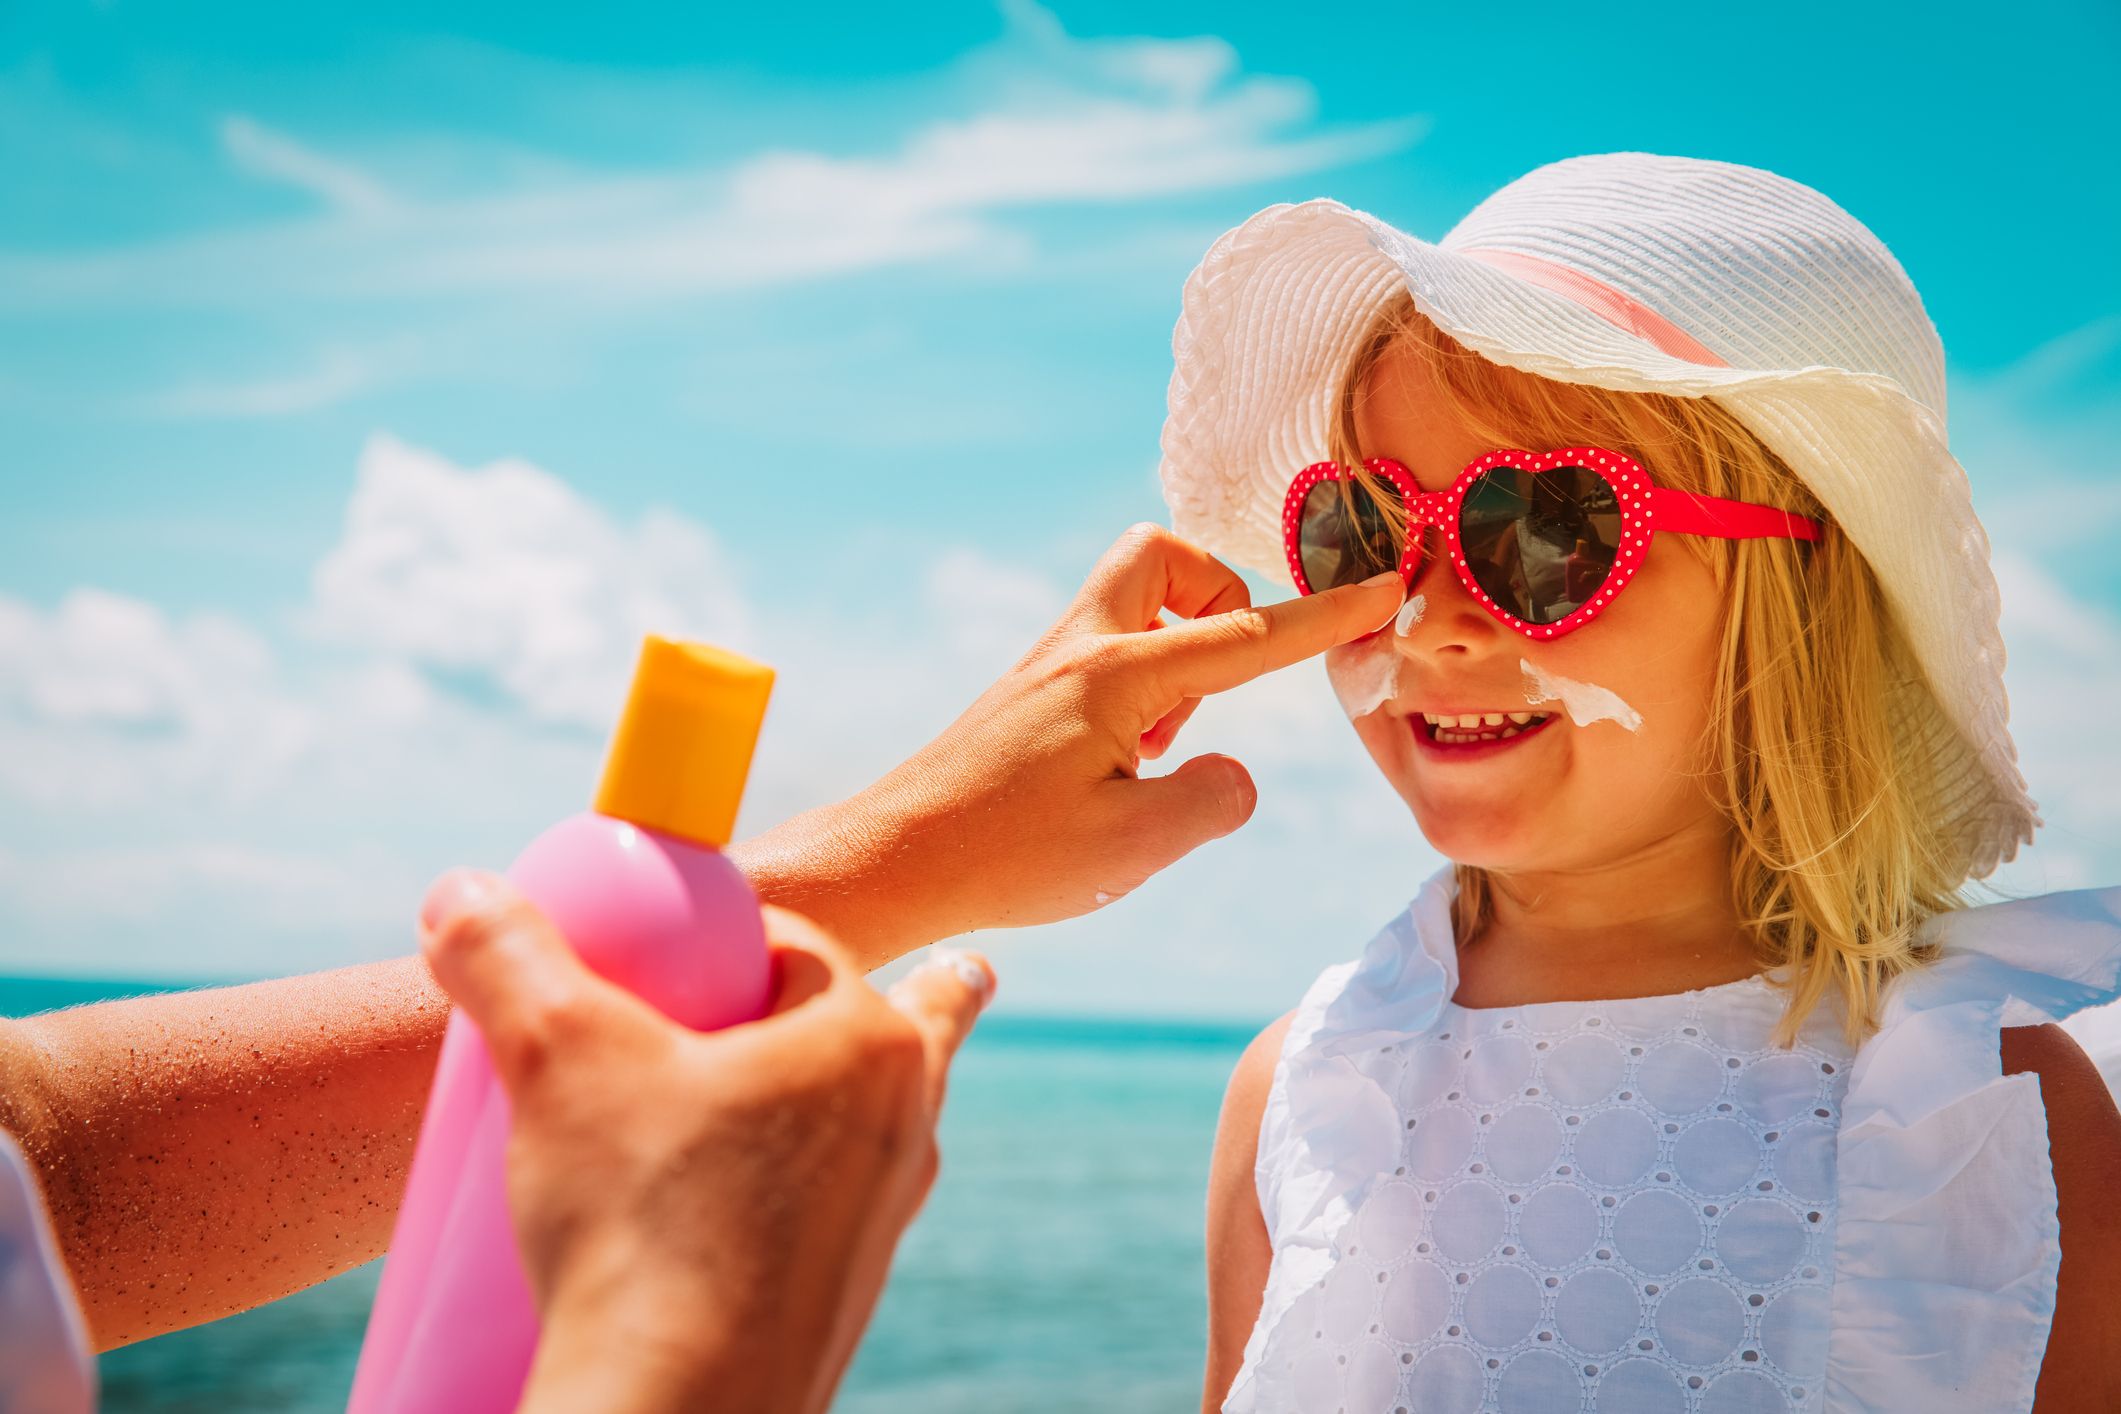 11 Best Sunscreens for Kids and Babies 2021 - Safe SPF for Children